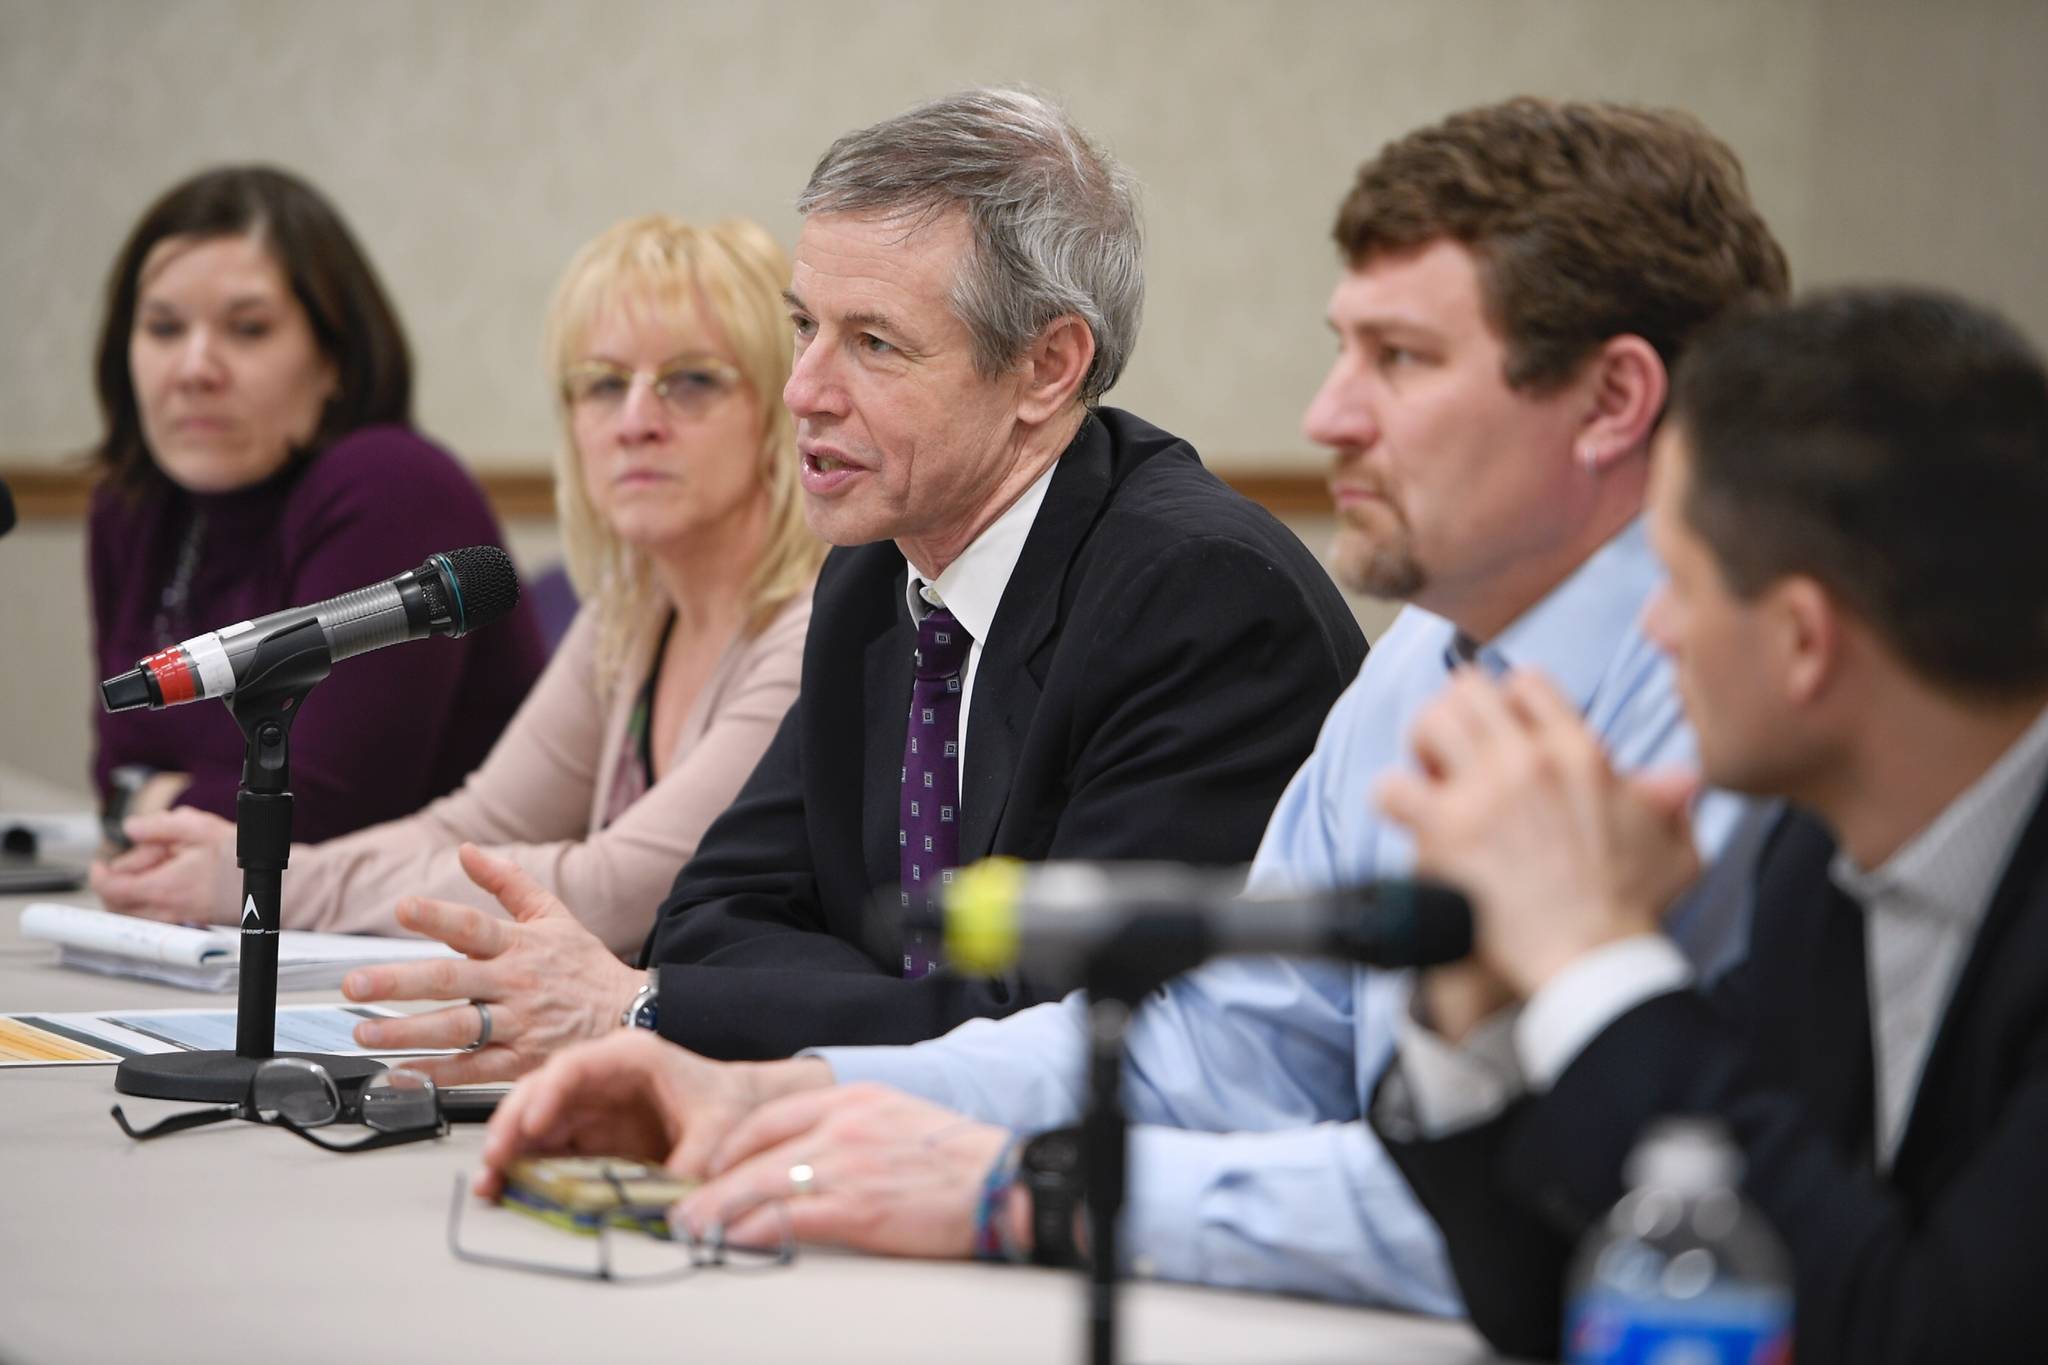 Rep. Matt Claman, D-Anchorage, center, speaks from a panel of the Alaska Criminal Justice Commission during a listening session at Elizabeth Peratrovich Hall on Thursday, Jan. 24, 2019. (Michael Penn | Juneau Empire)